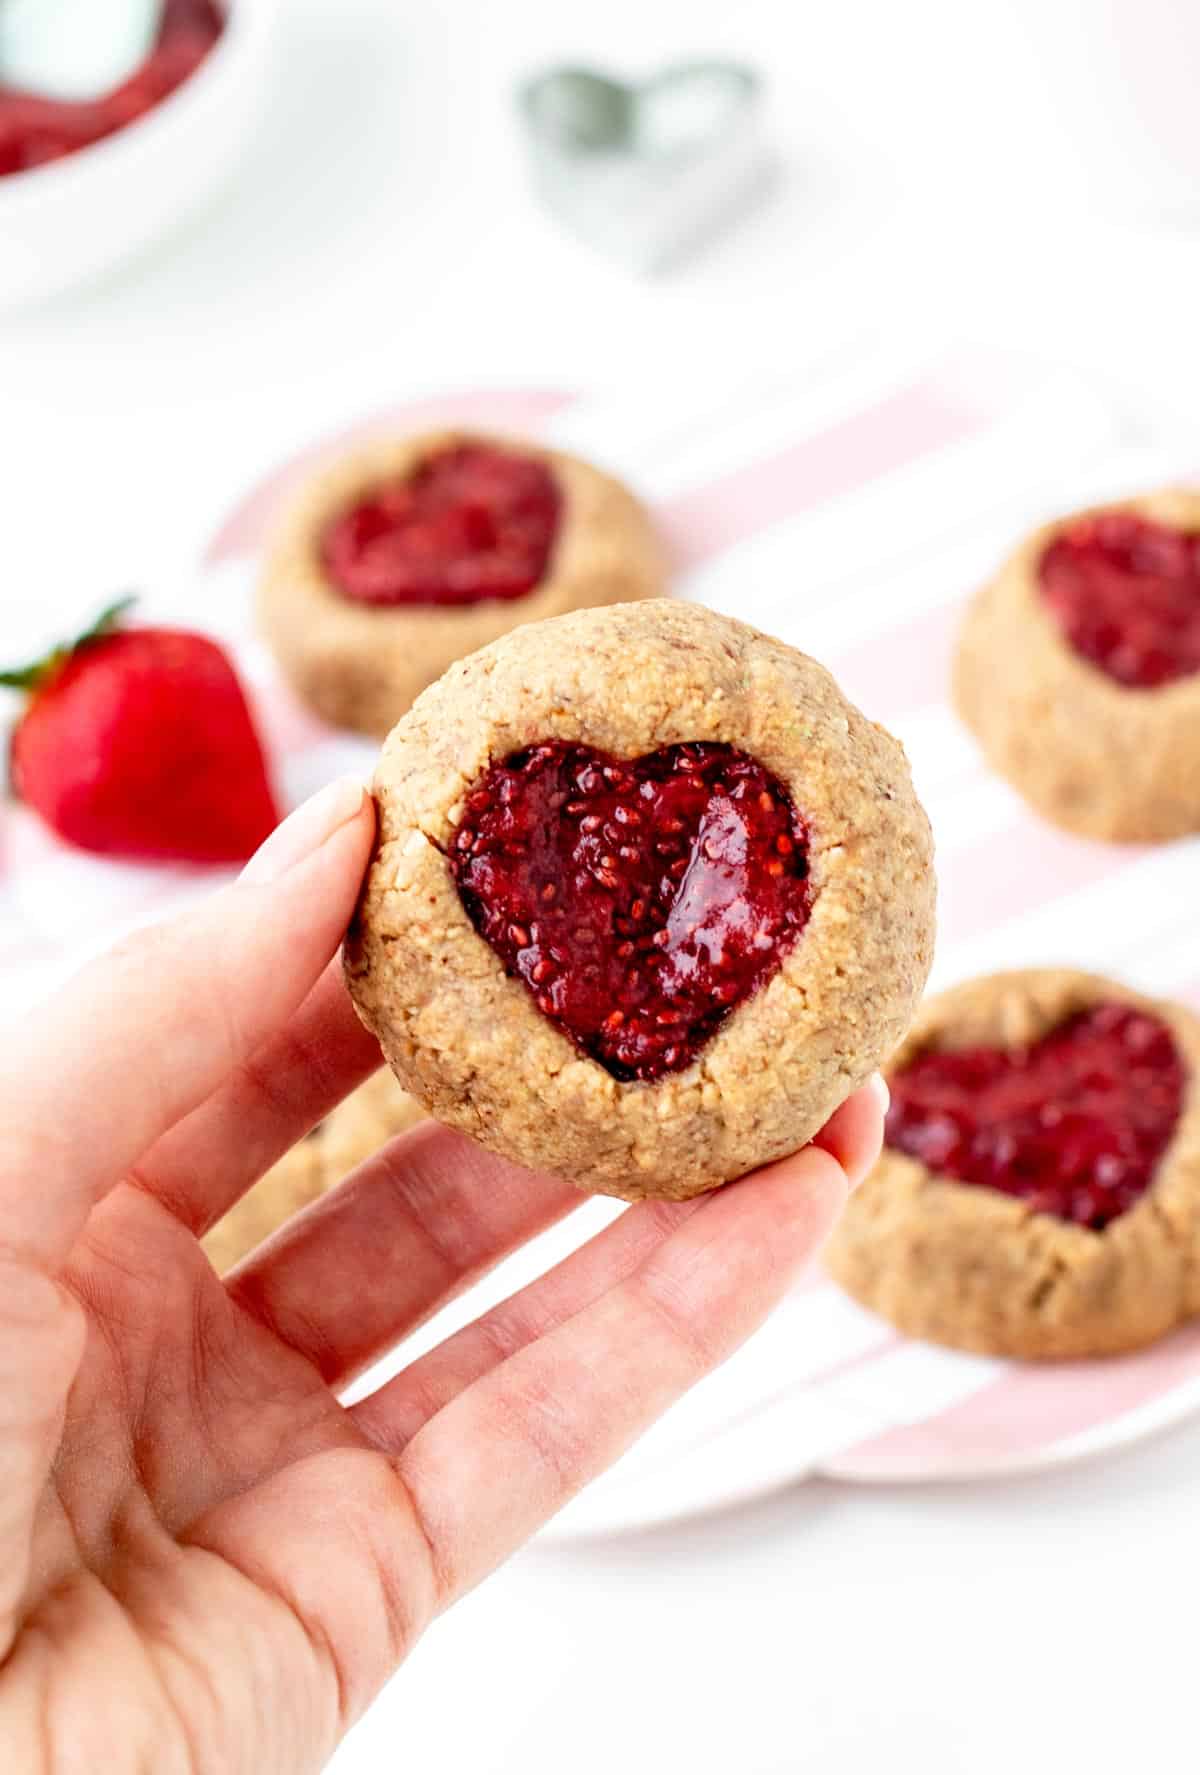 A close-up of the jam filled heart cookies being held in someone's hand.